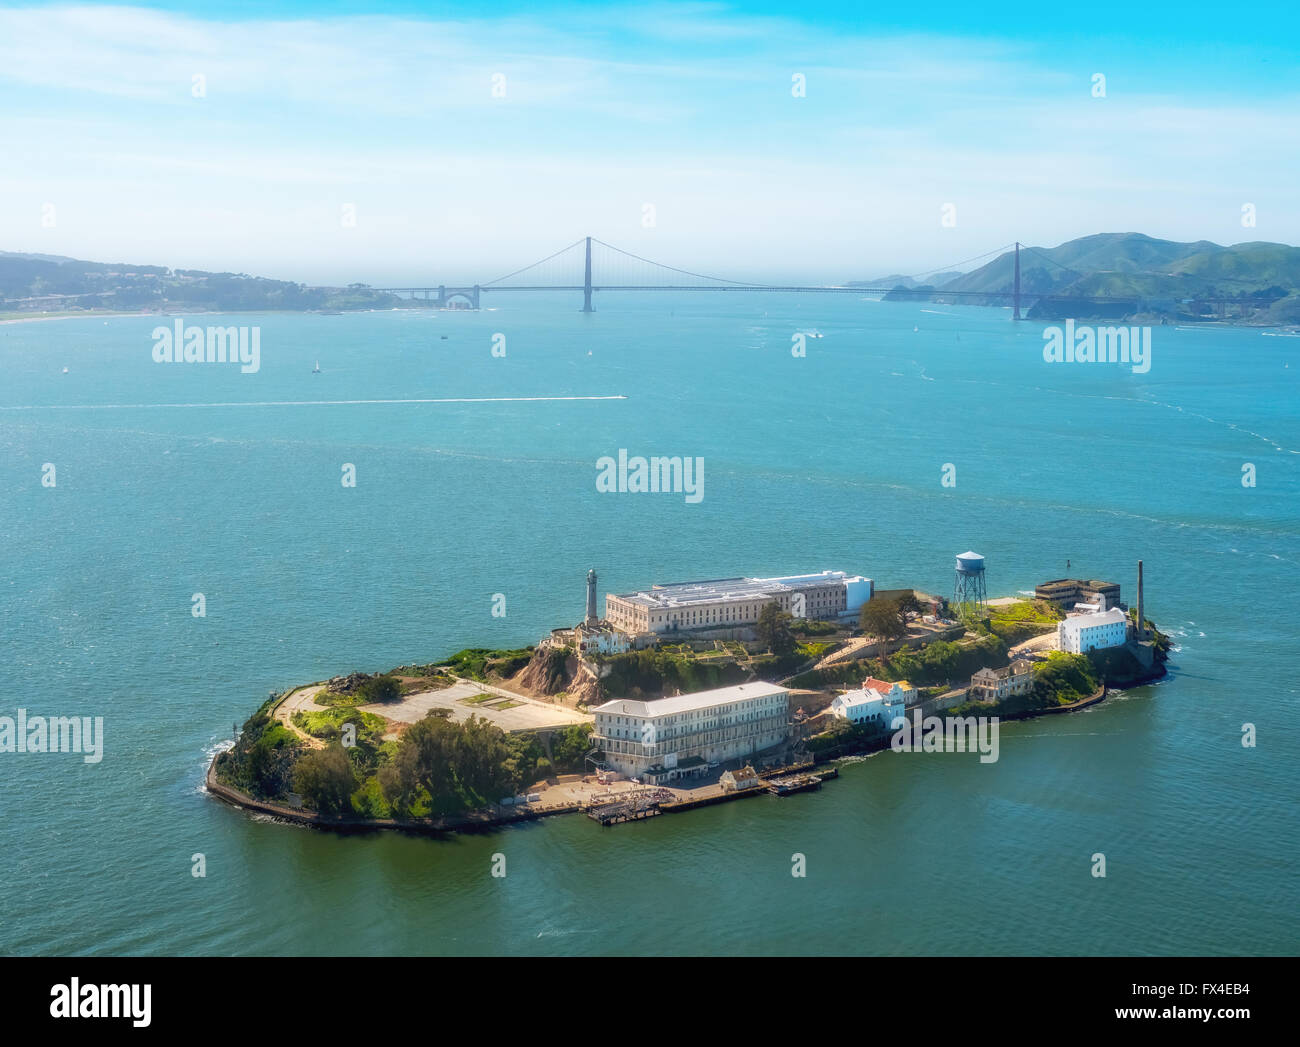 Aerial view, Alcatraz, Golden Gate Bridge in the background, Alcatraz Iceland with lighthouse in backlight, San Francisco, Stock Photo